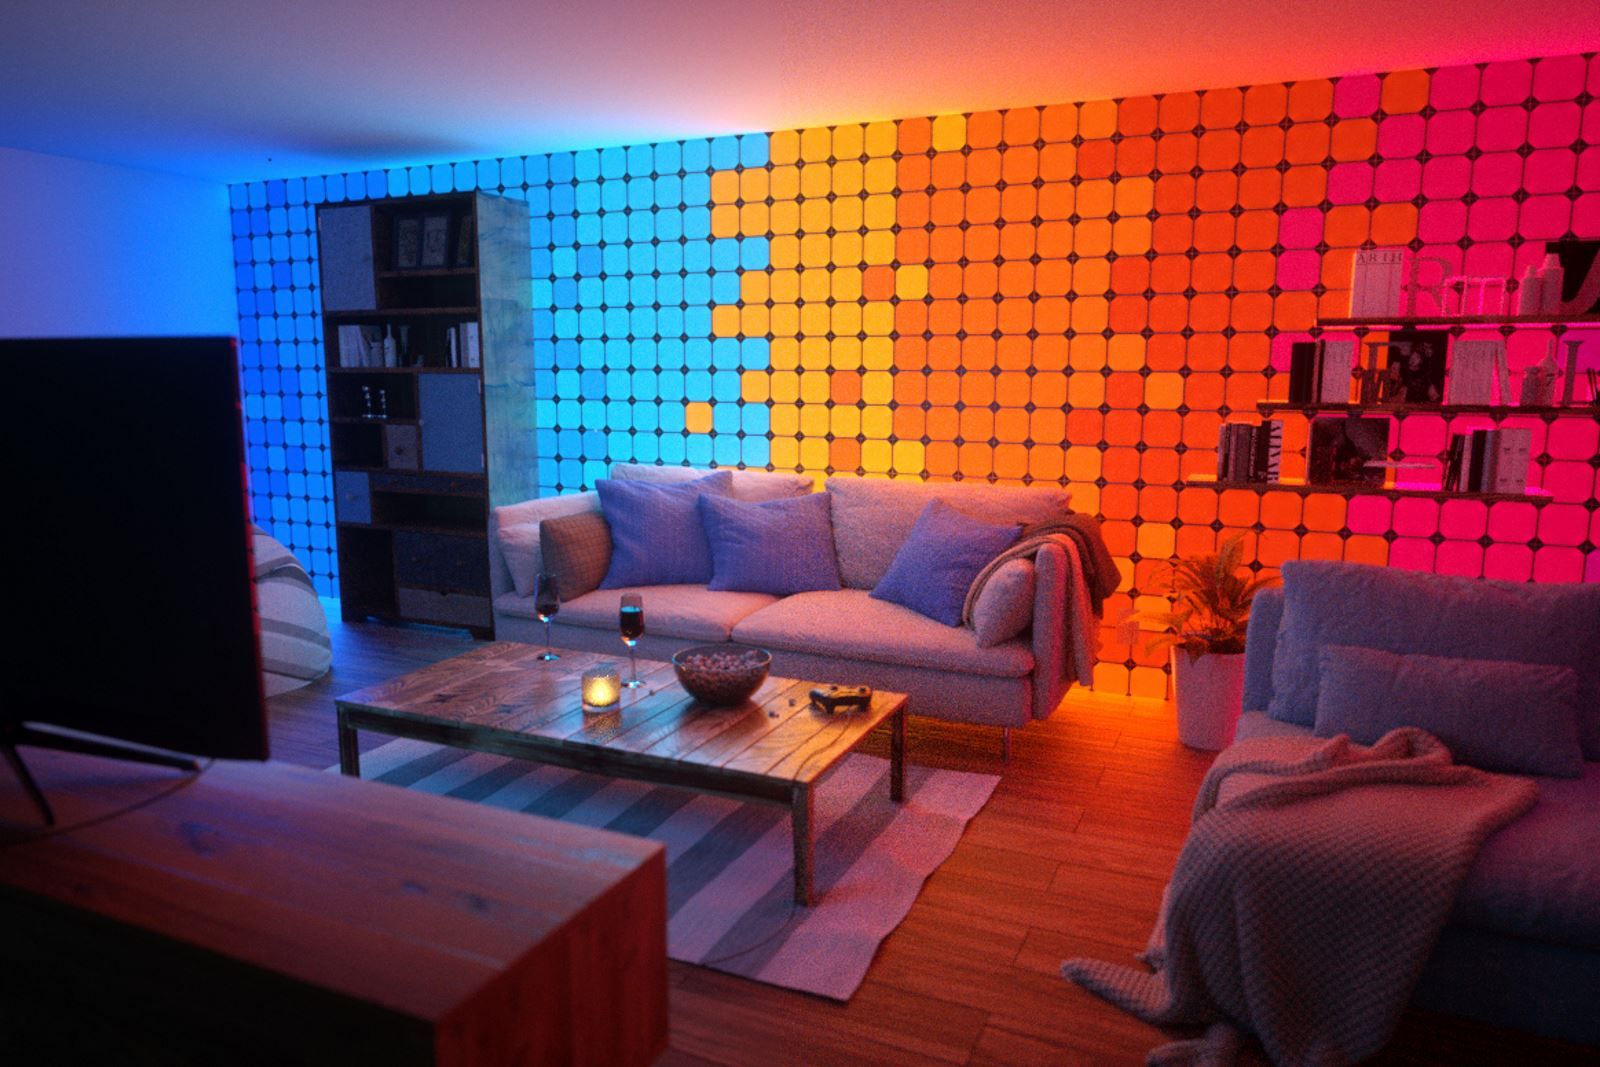 Stunning Nanoleaf Canvas turns a wall into light image 1